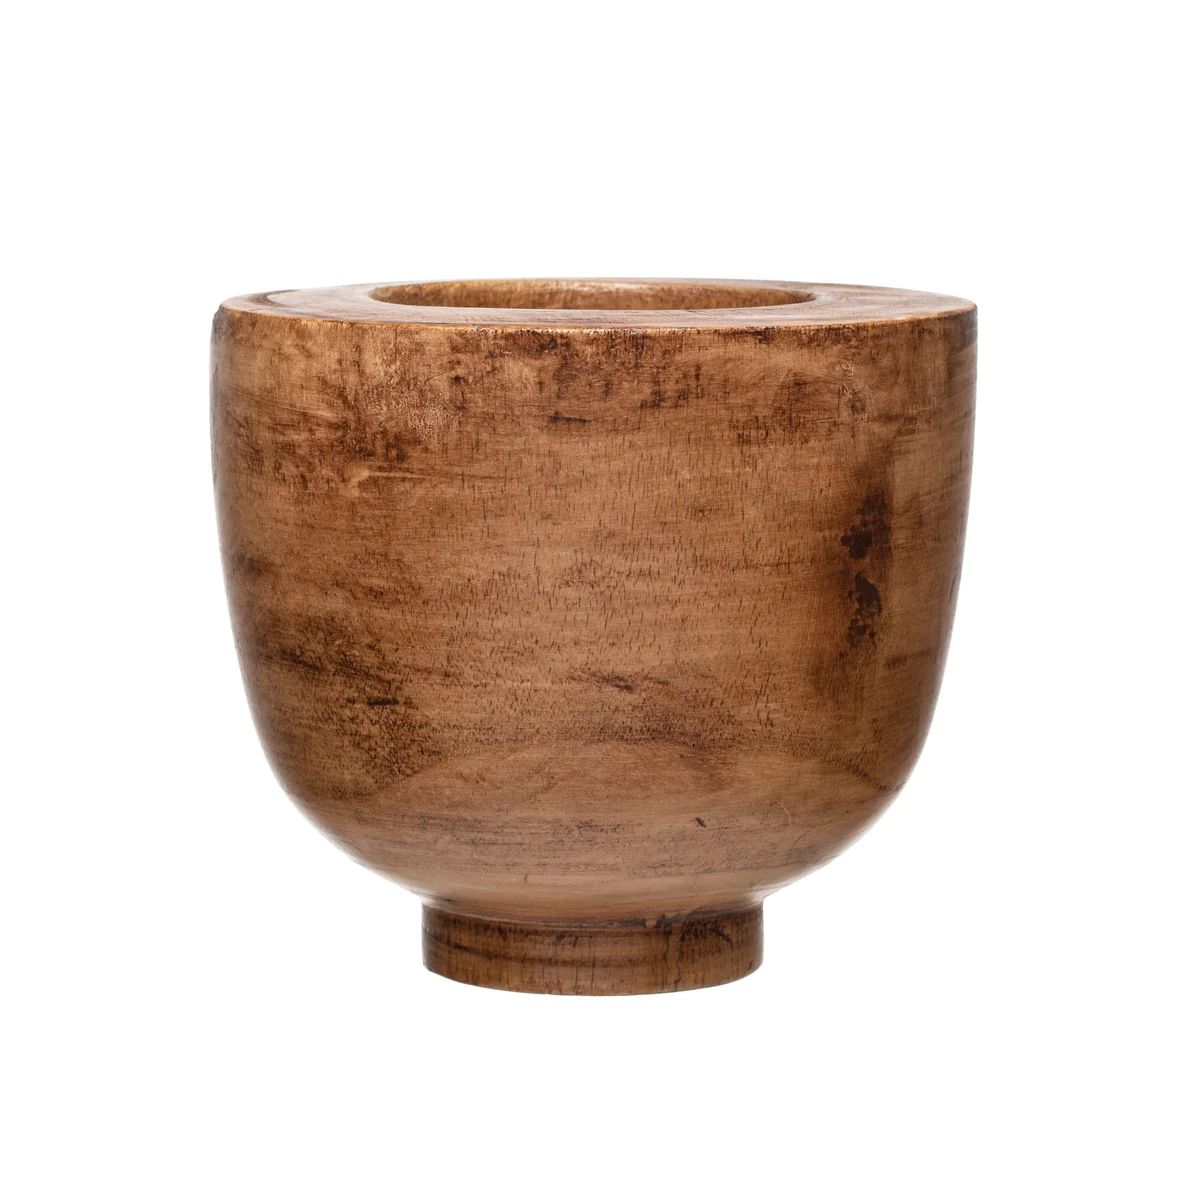 Decorative Walnut Wooden Bowl | APIARY by The Busy Bee